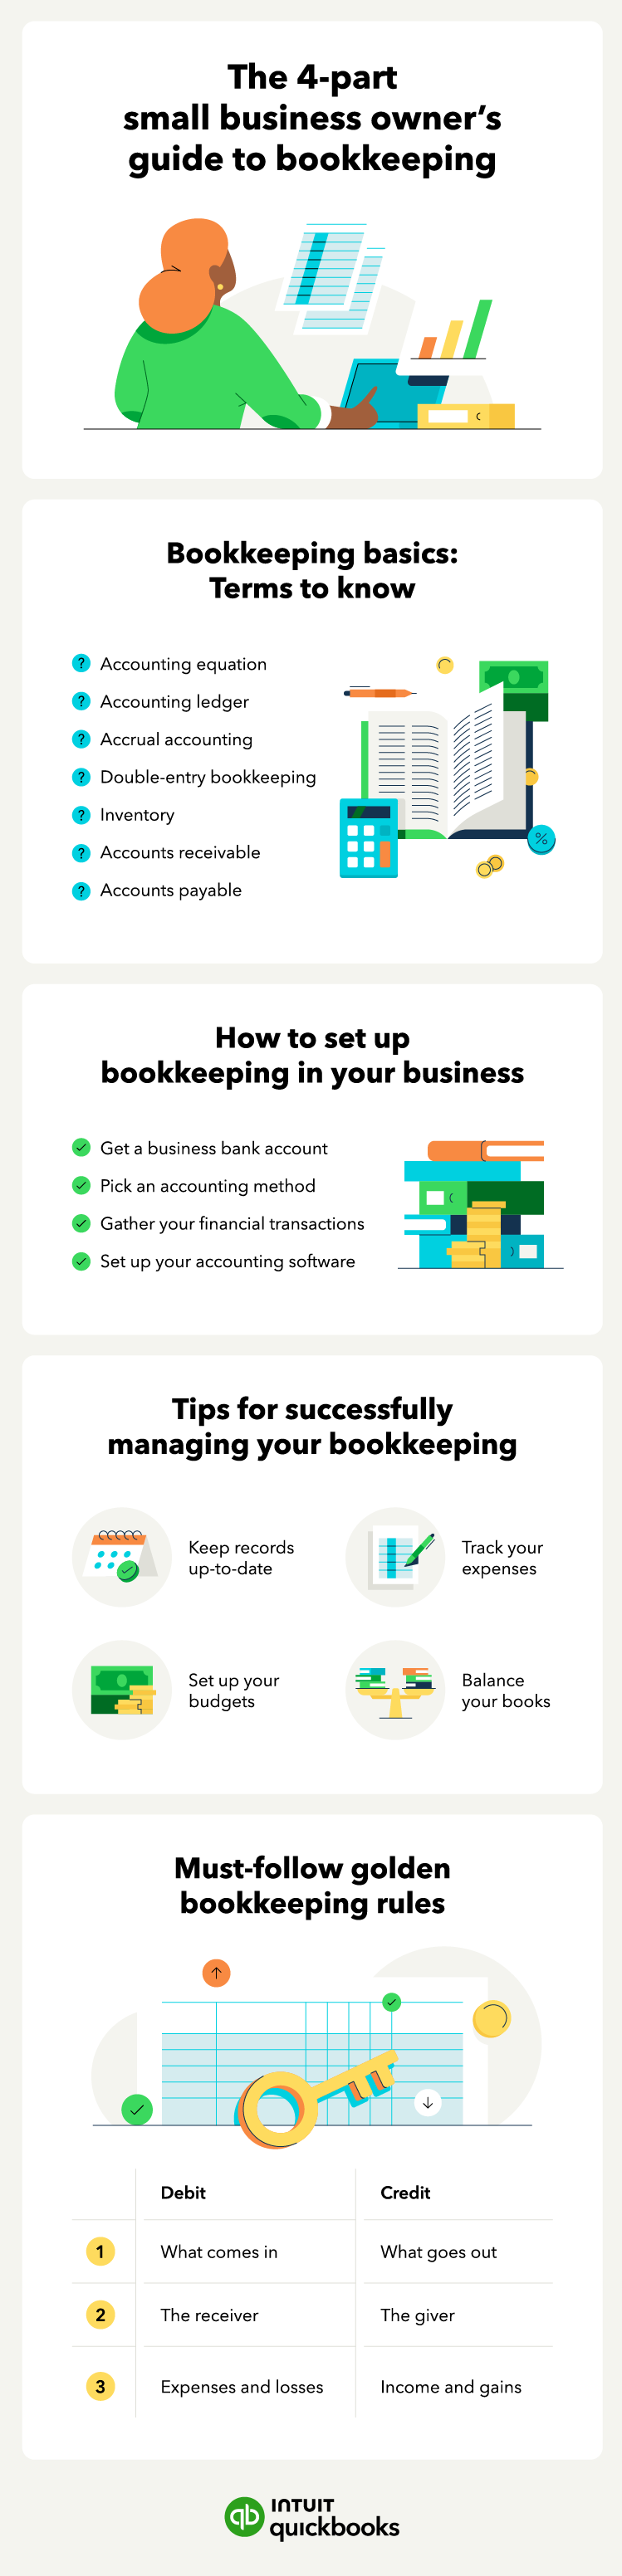 The 4-part small business owner's guide to bookkeeping